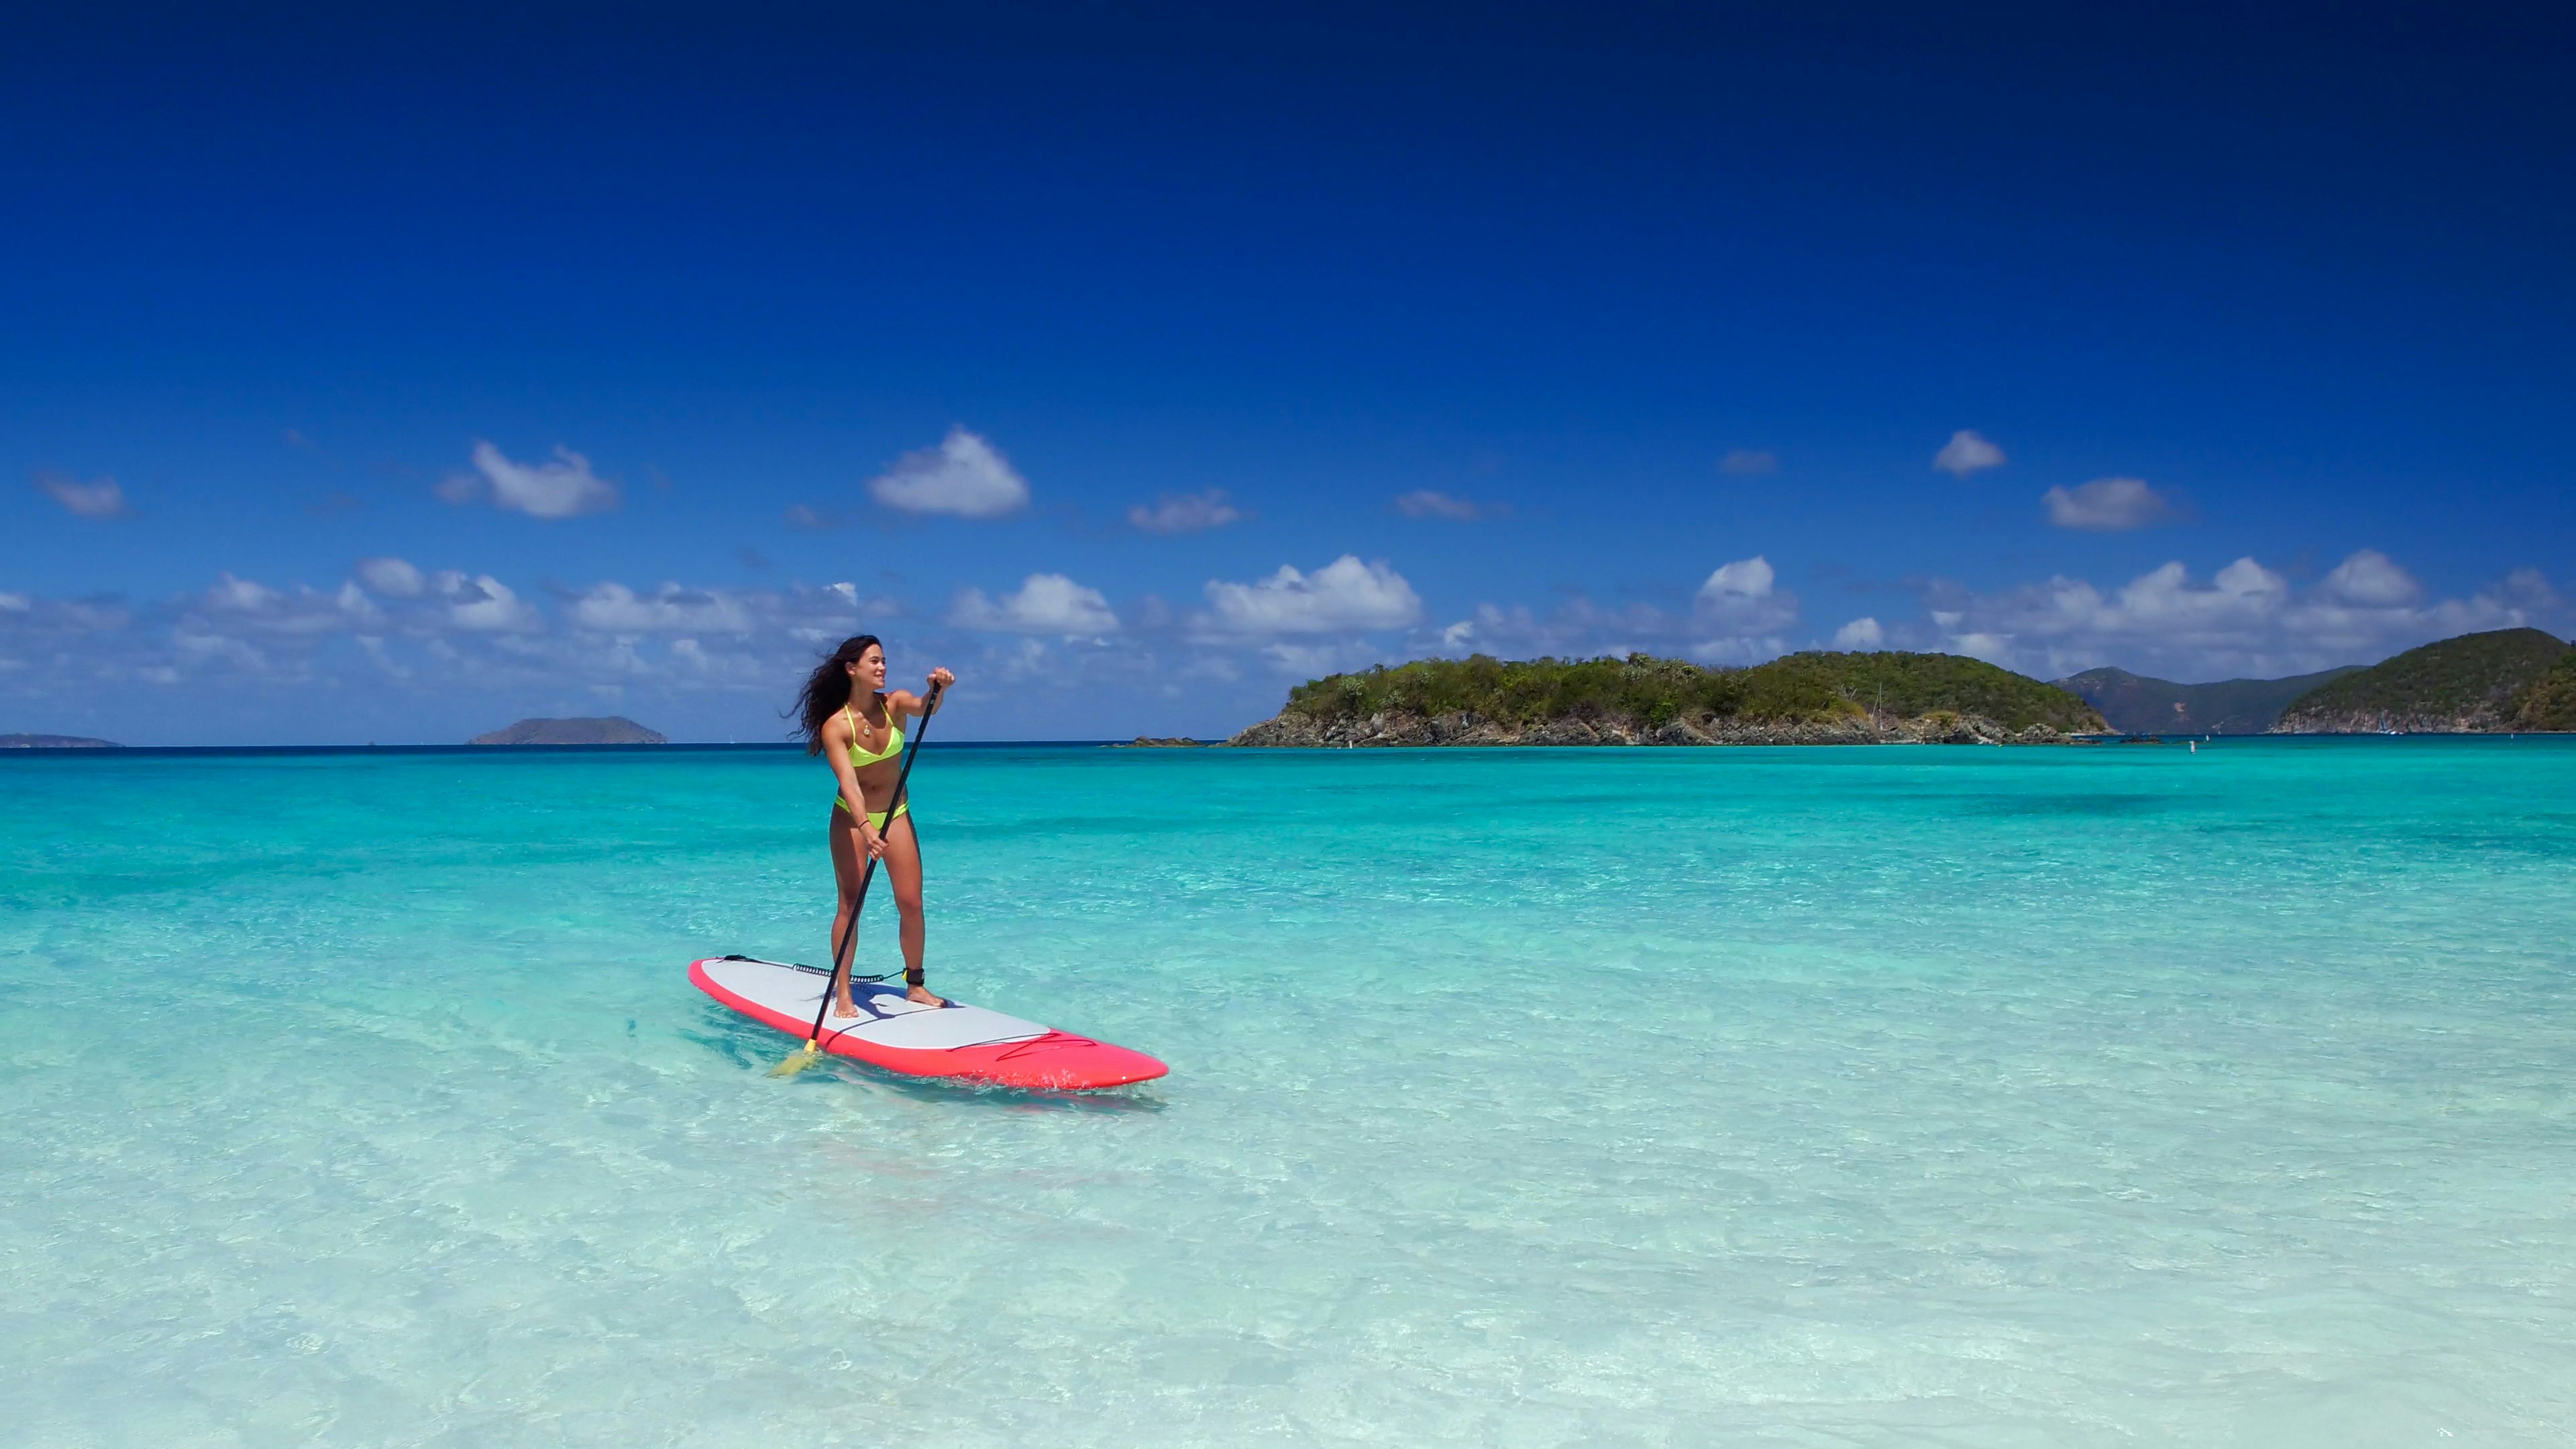 A young woman is paddle boarding off the coast of the US Virgin Islands